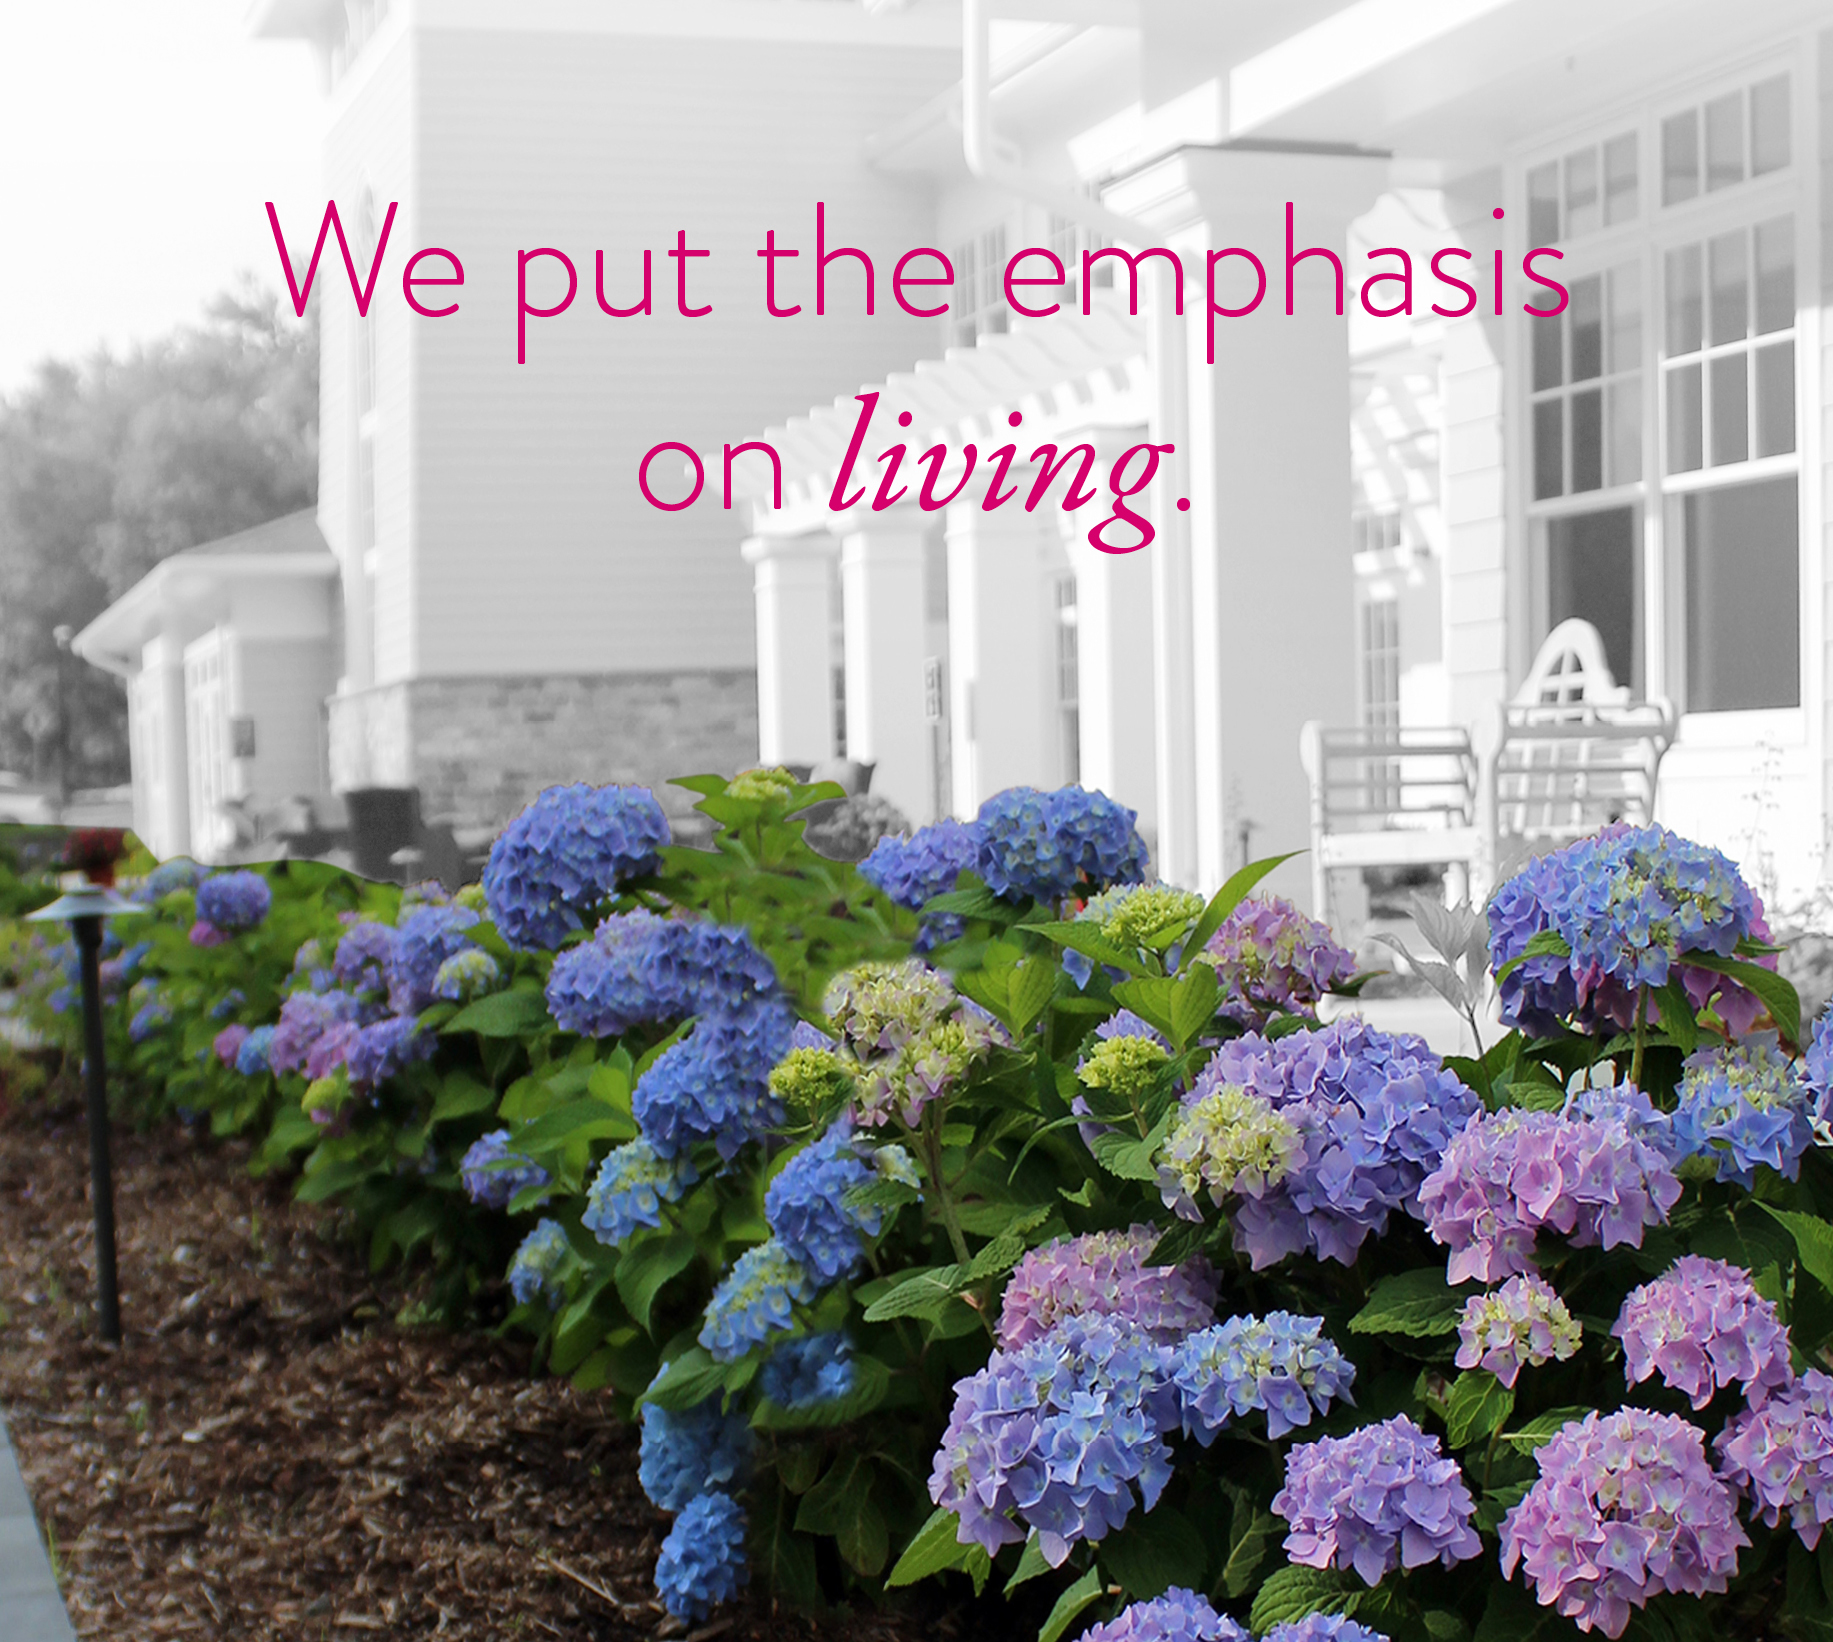 We put the emphasis on living.